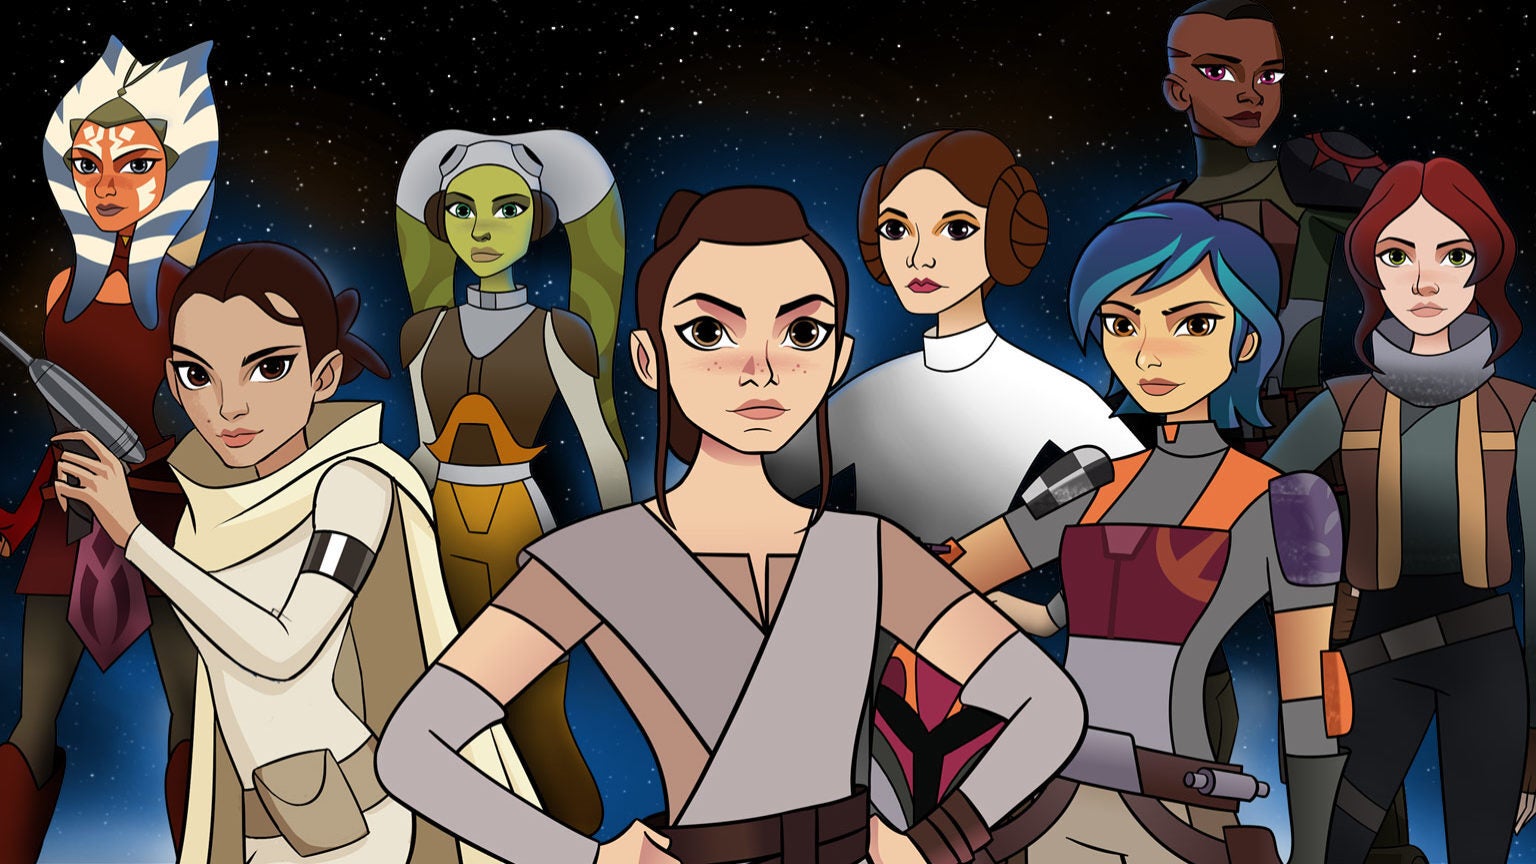 Image from Star Wars Forces of Destiny show